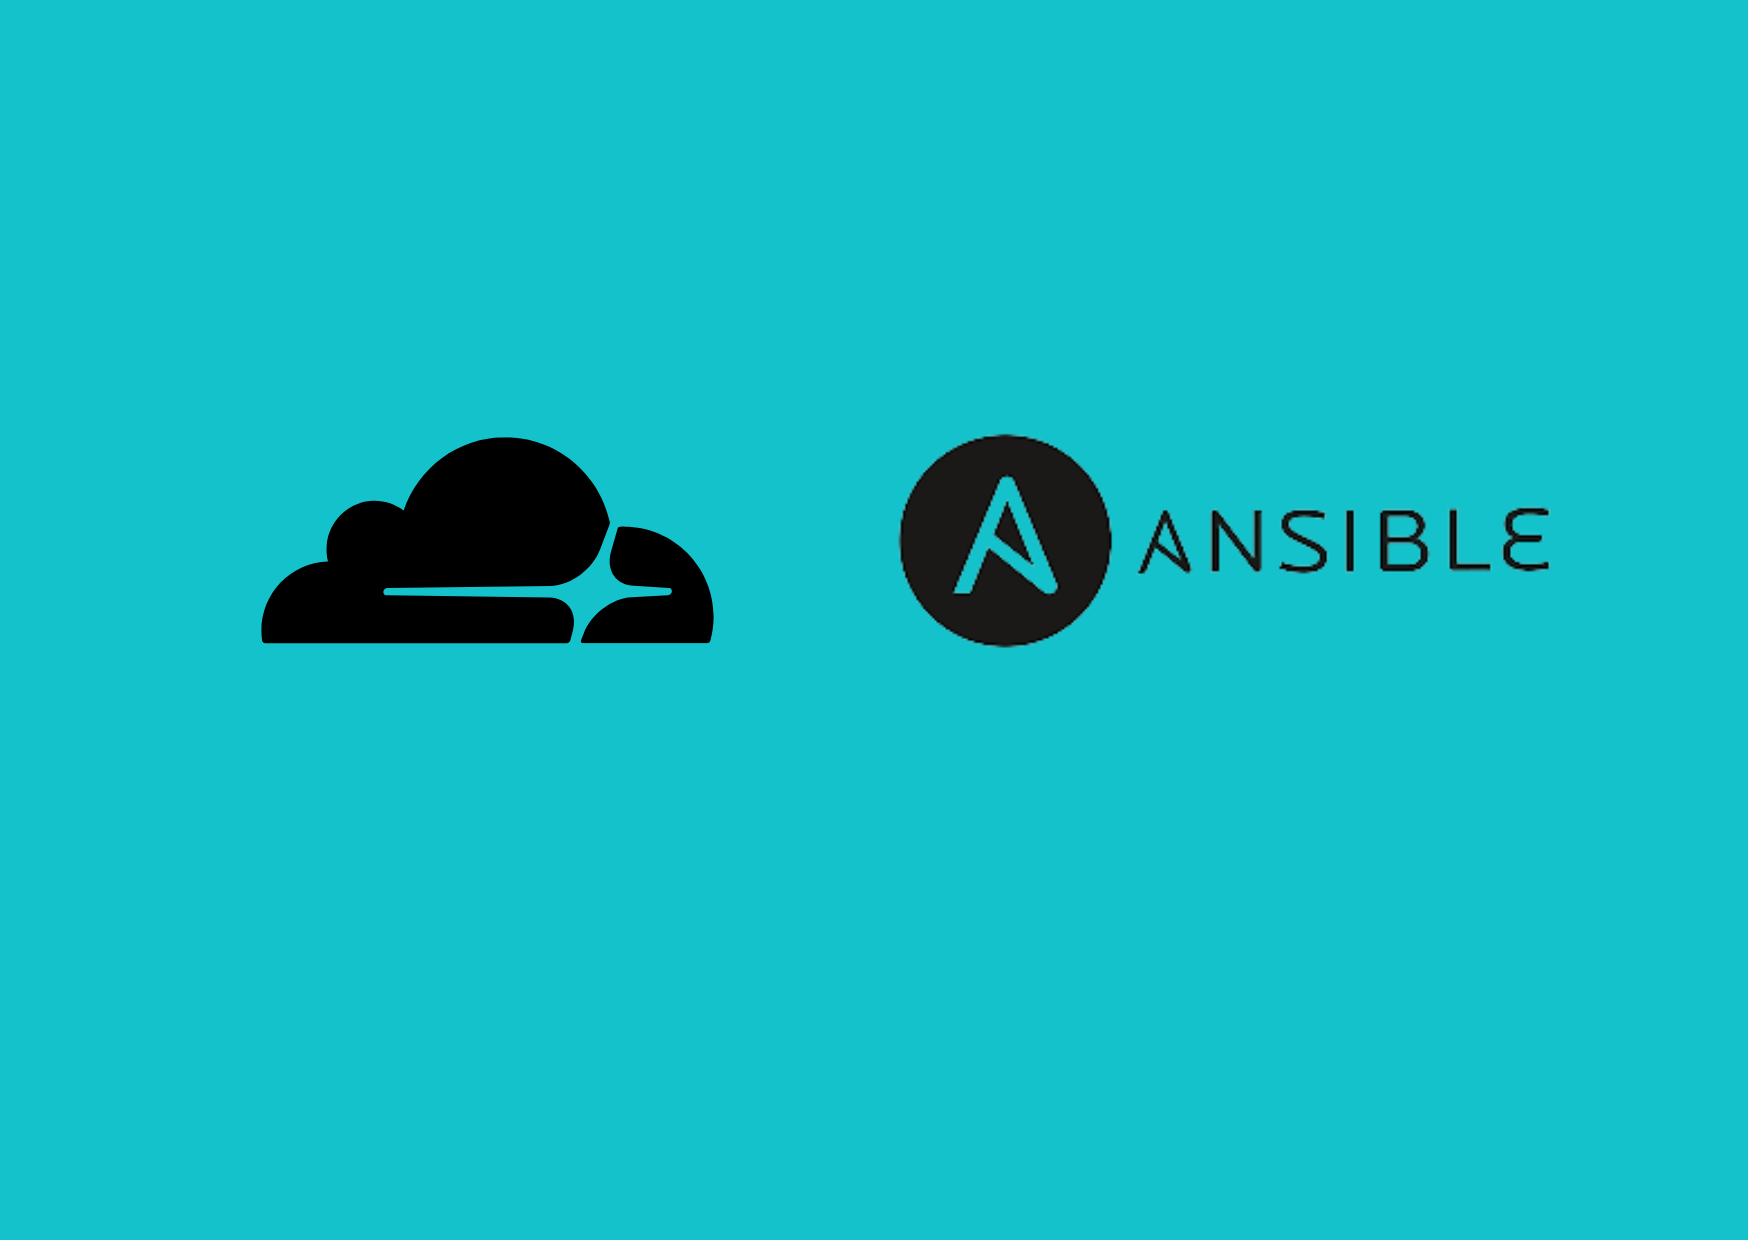 cloudflare ansible